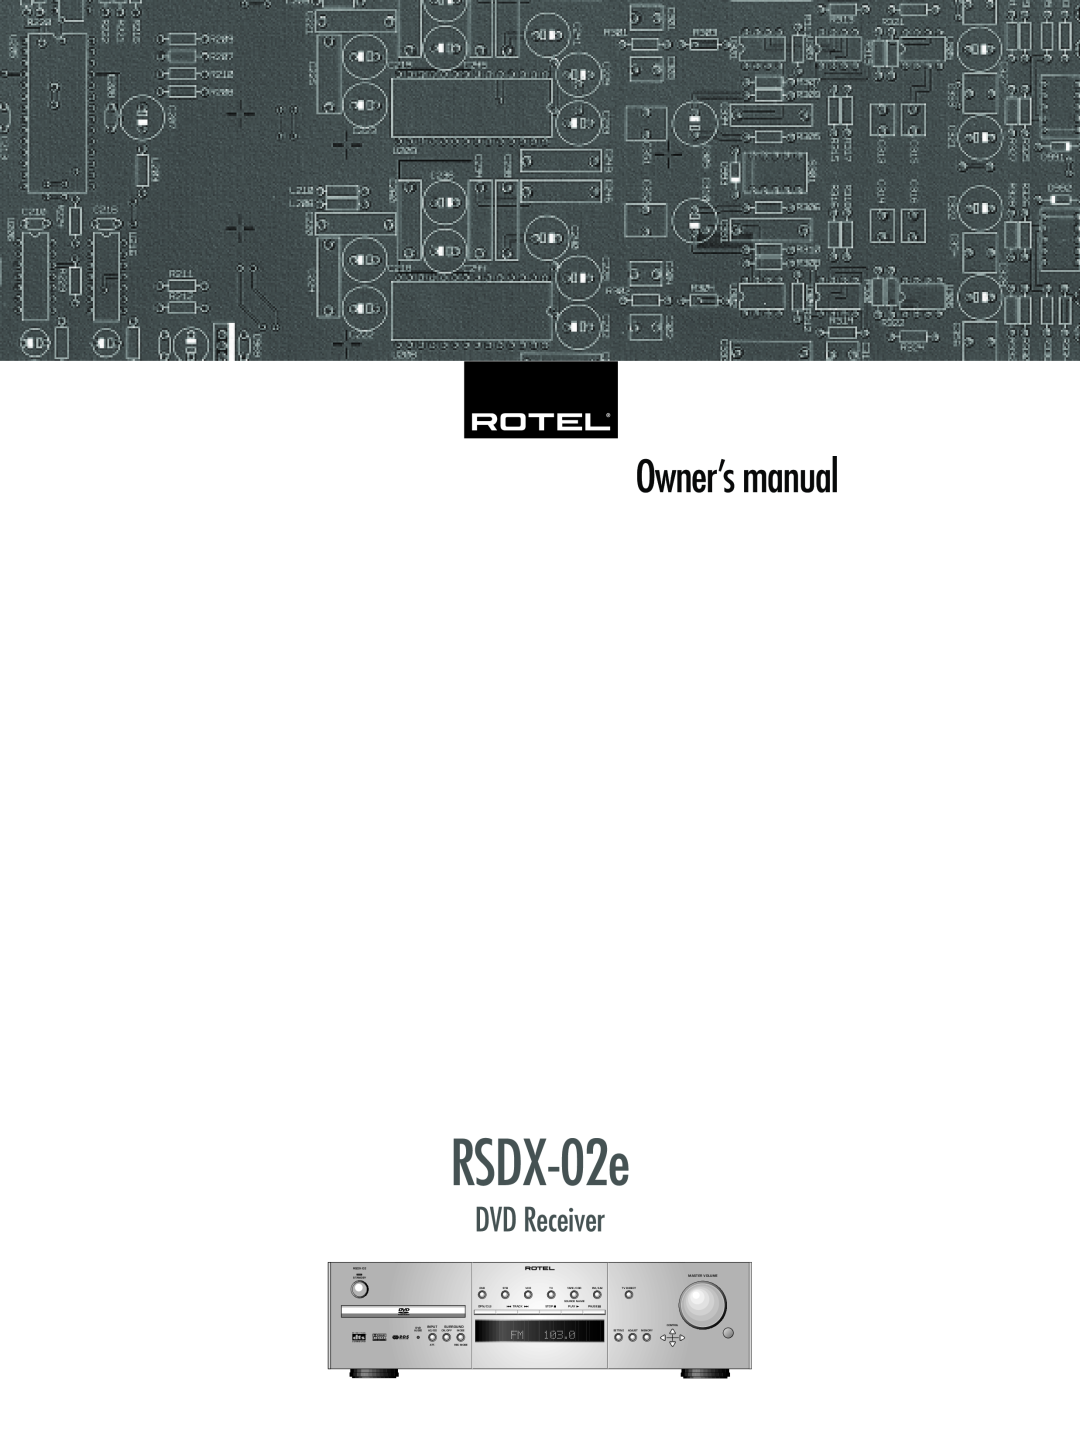 Rotel RSDX-02e owner manual DVD Receiver, Owner’s manual 